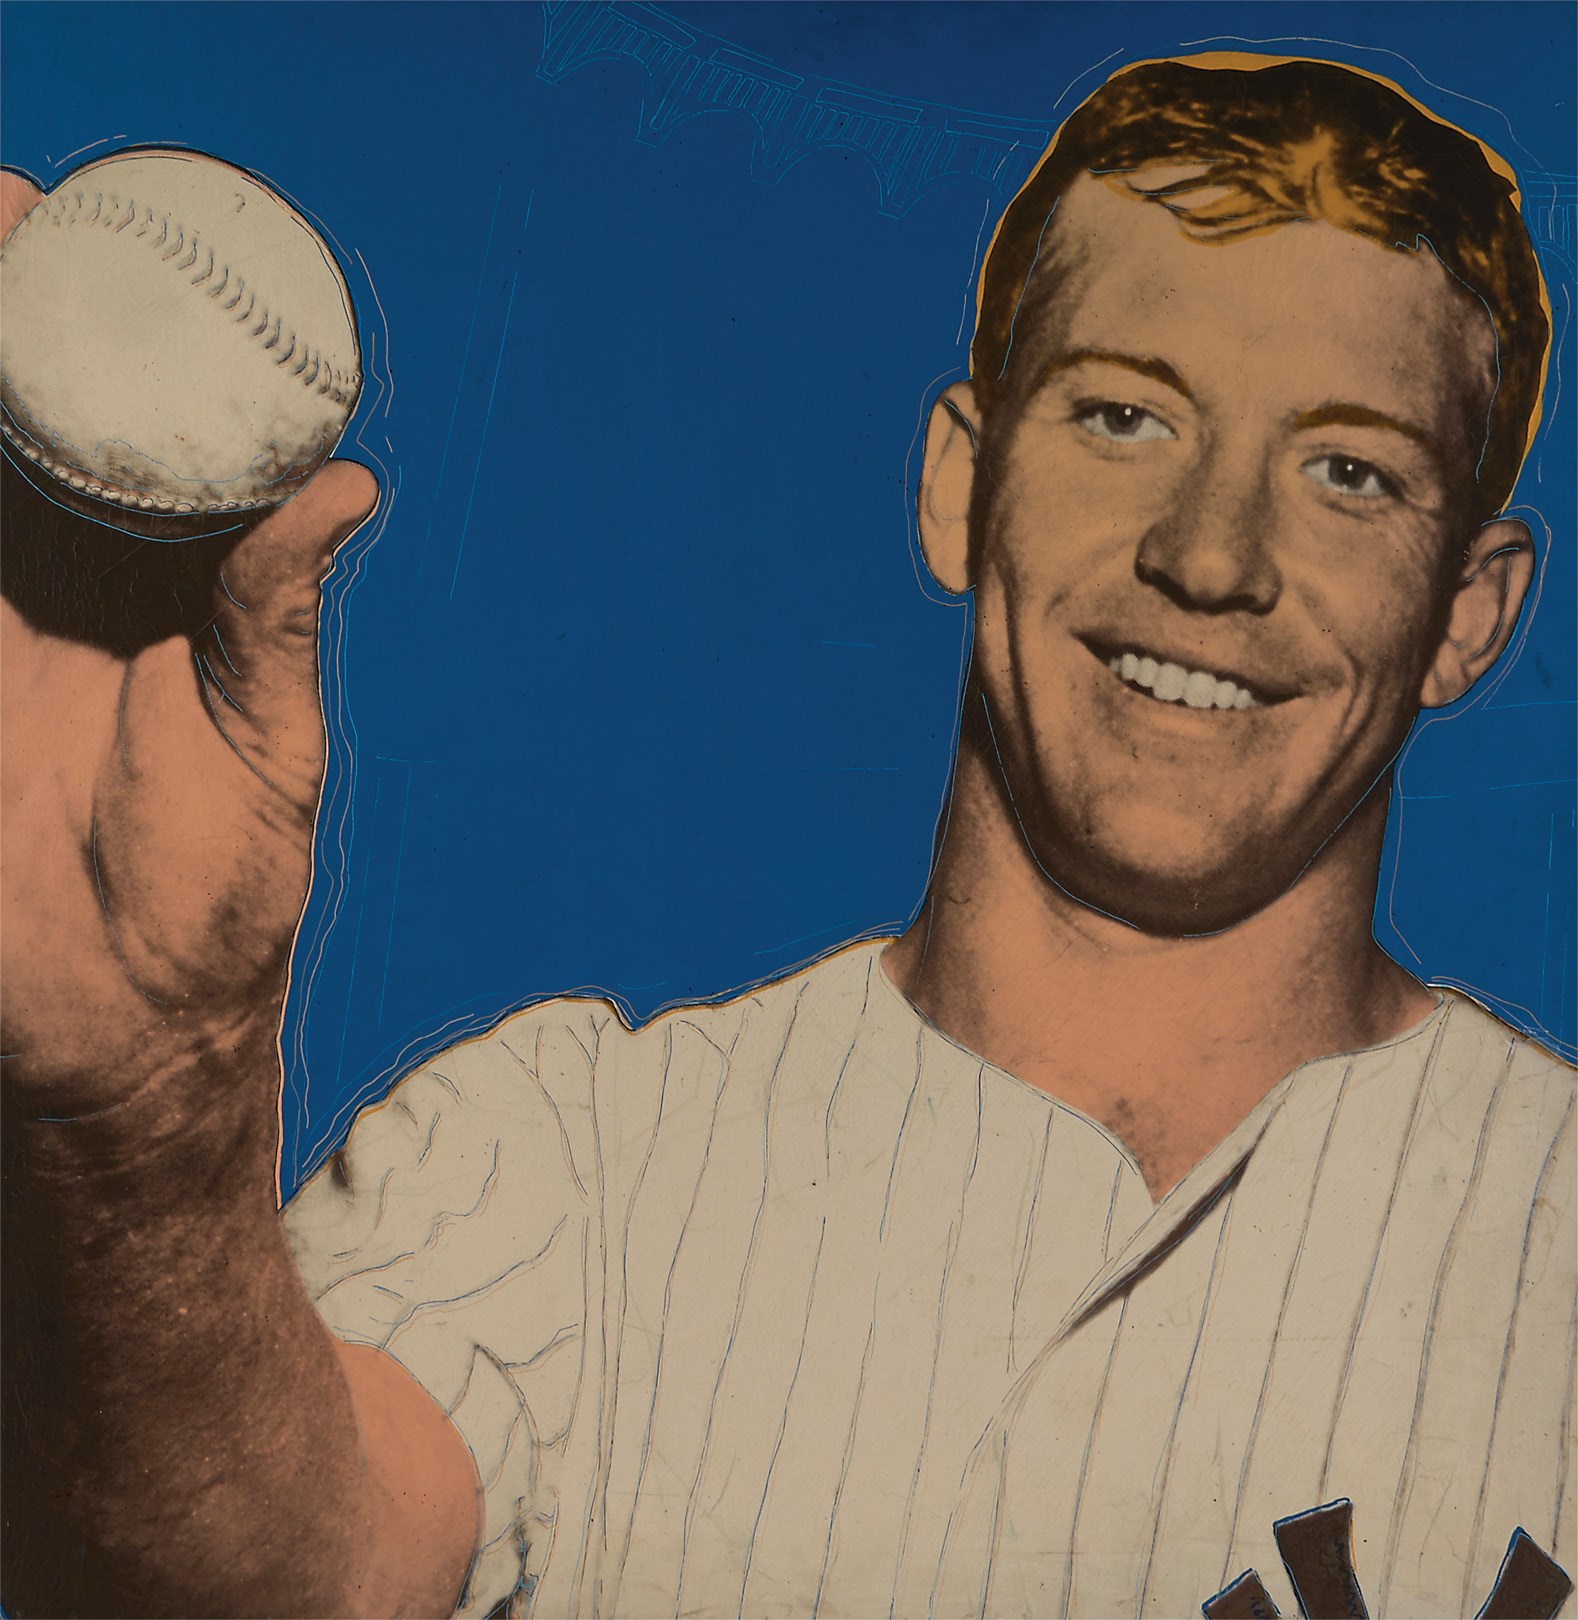 Mantle and Maris - "The Mick" Limited Edition Silk Screen on Canvas by Steve Kaufman